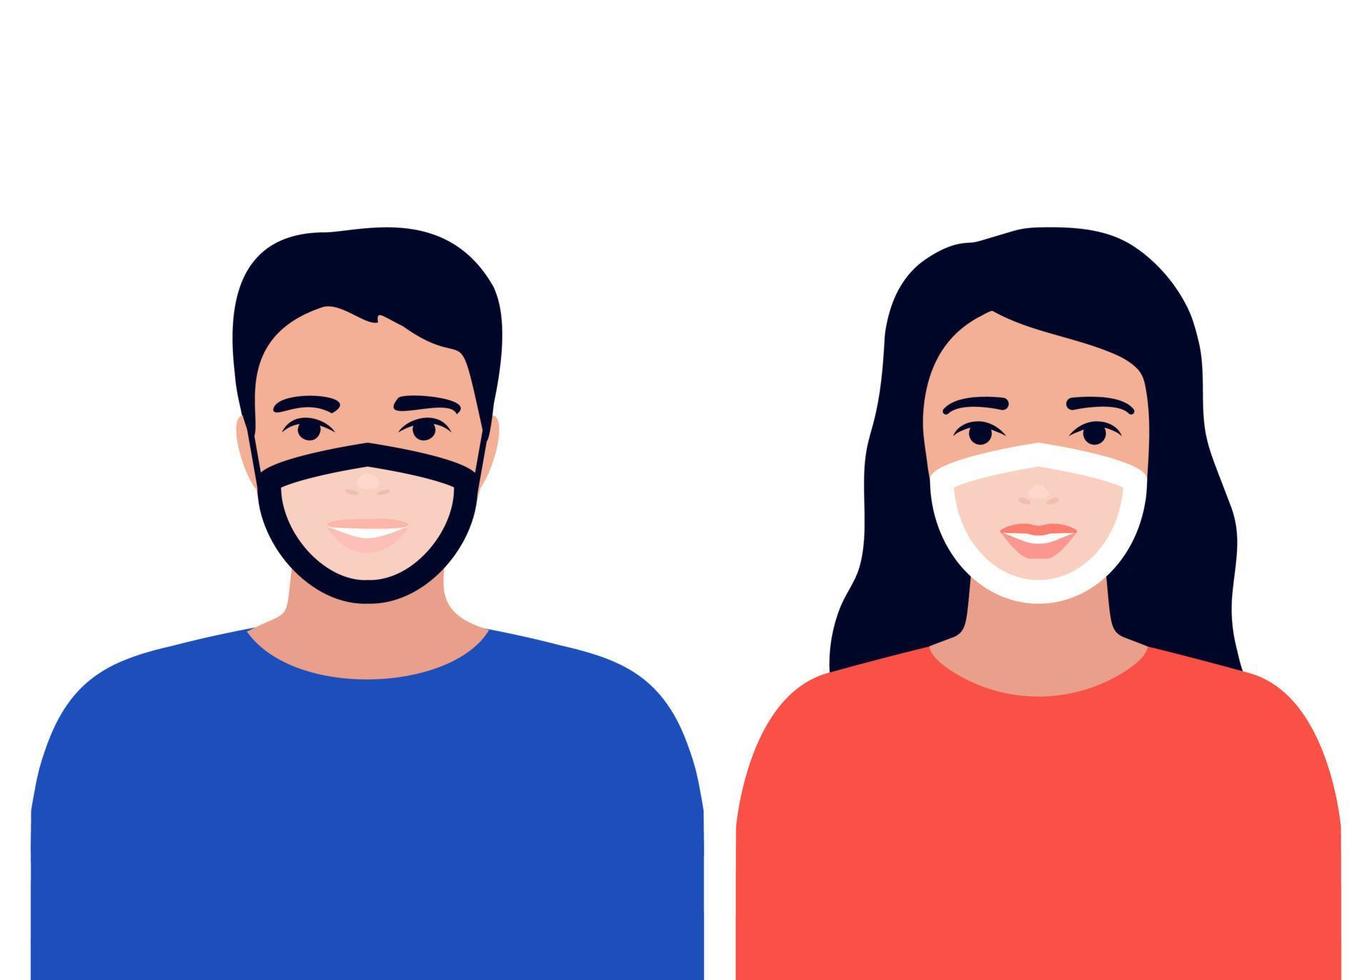 Face mask with transparent window for man and woman. Focus on eyes to understand lip reading. Help hearing impairment or deaf people during coronavirus. Vector illustration